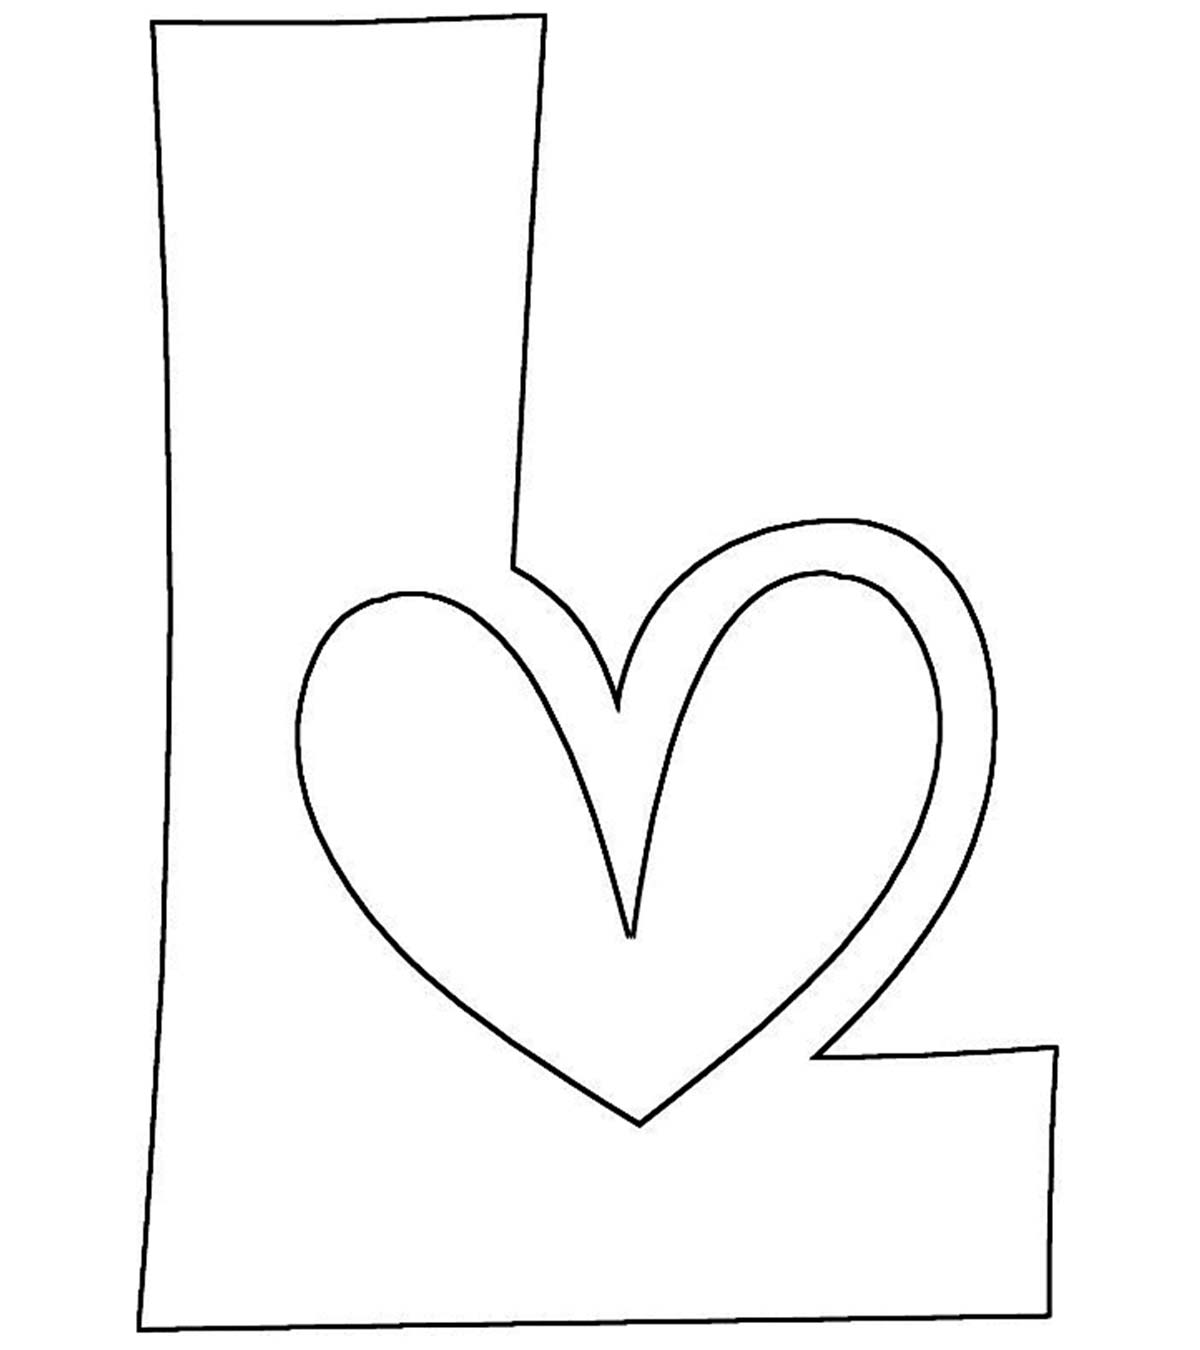 Top 10 Letter L Coloring Pages For Your Little Ones_image